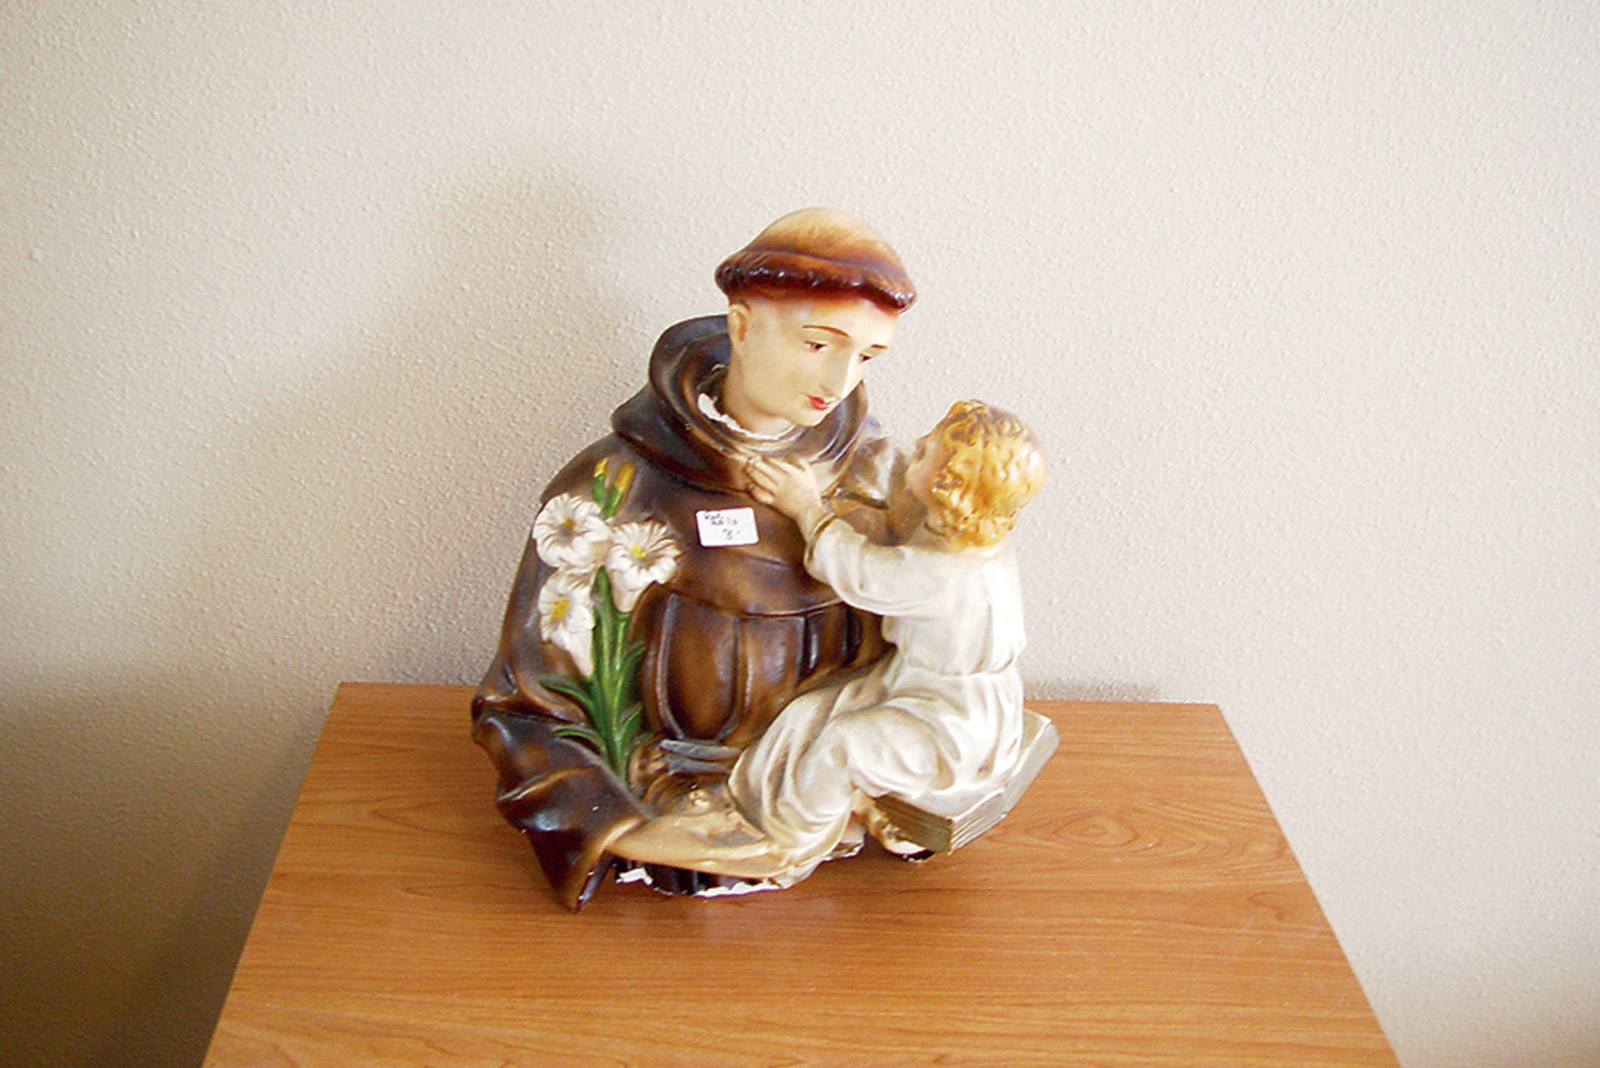 A photograph titled “What’s Mine Is Yours” depicting a religious statuette marked with a price tag, from Casey Logan’s two thousand and seven artist project titled “Shopping in Sin.”